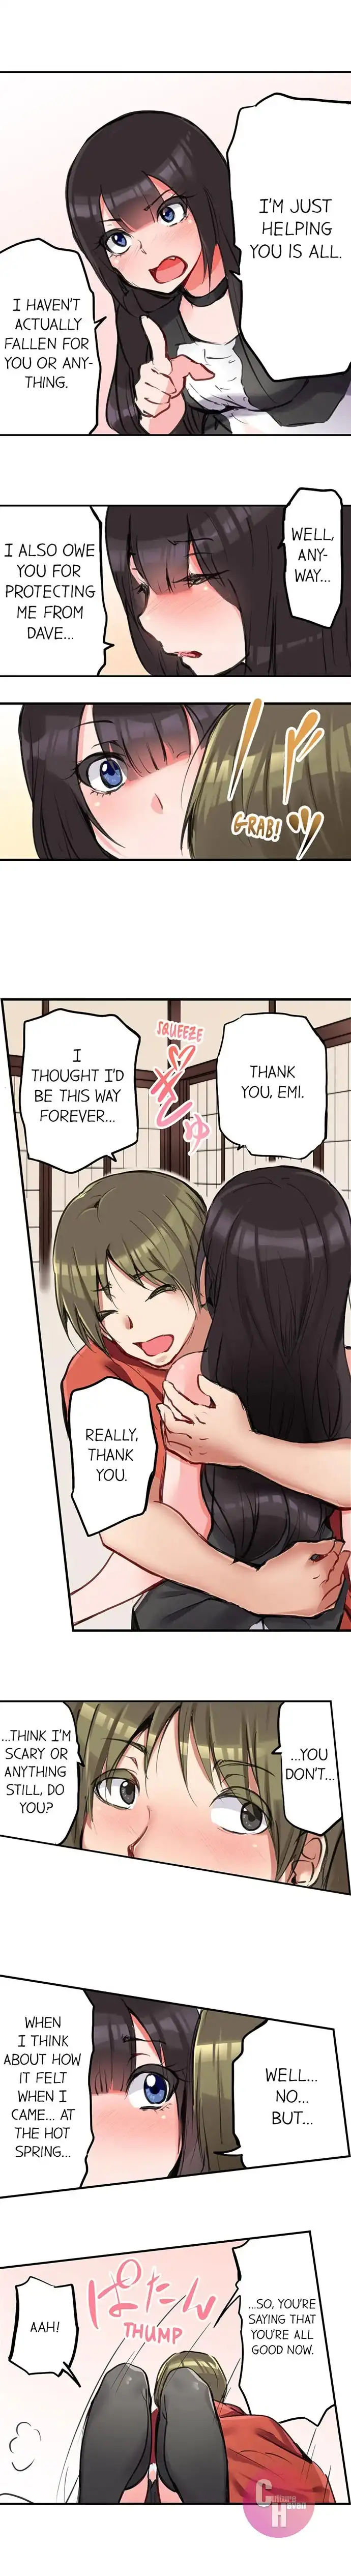 All Night Sex with Biggest Cock Chapter 8 Read Webtoon